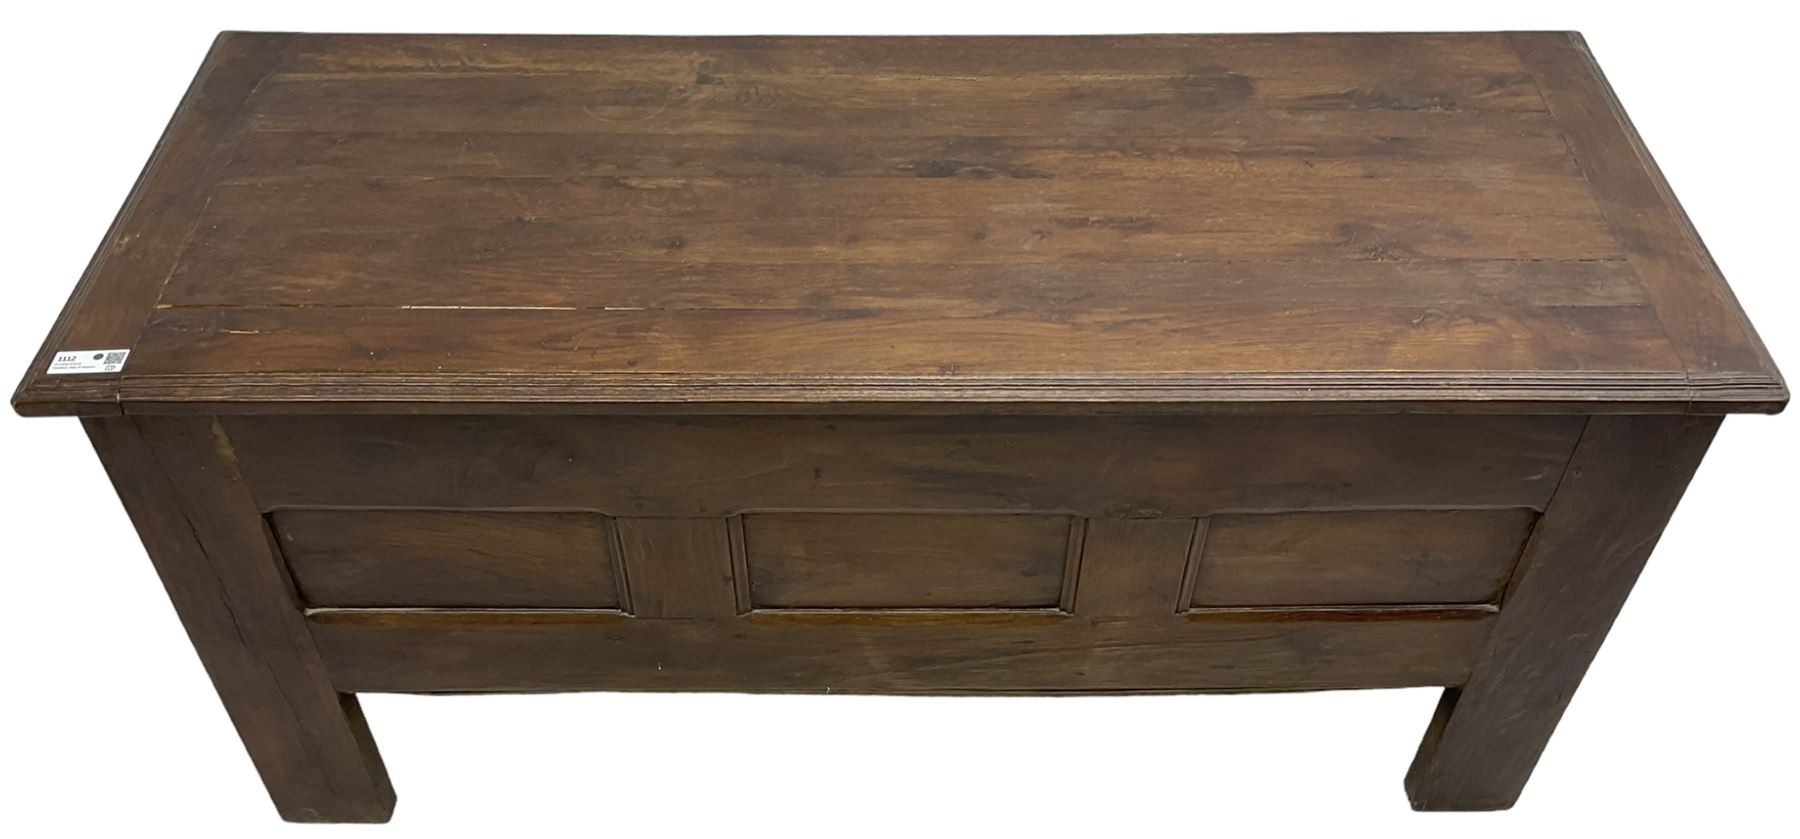 Large 18th century oak coffer or chest - Image 5 of 9